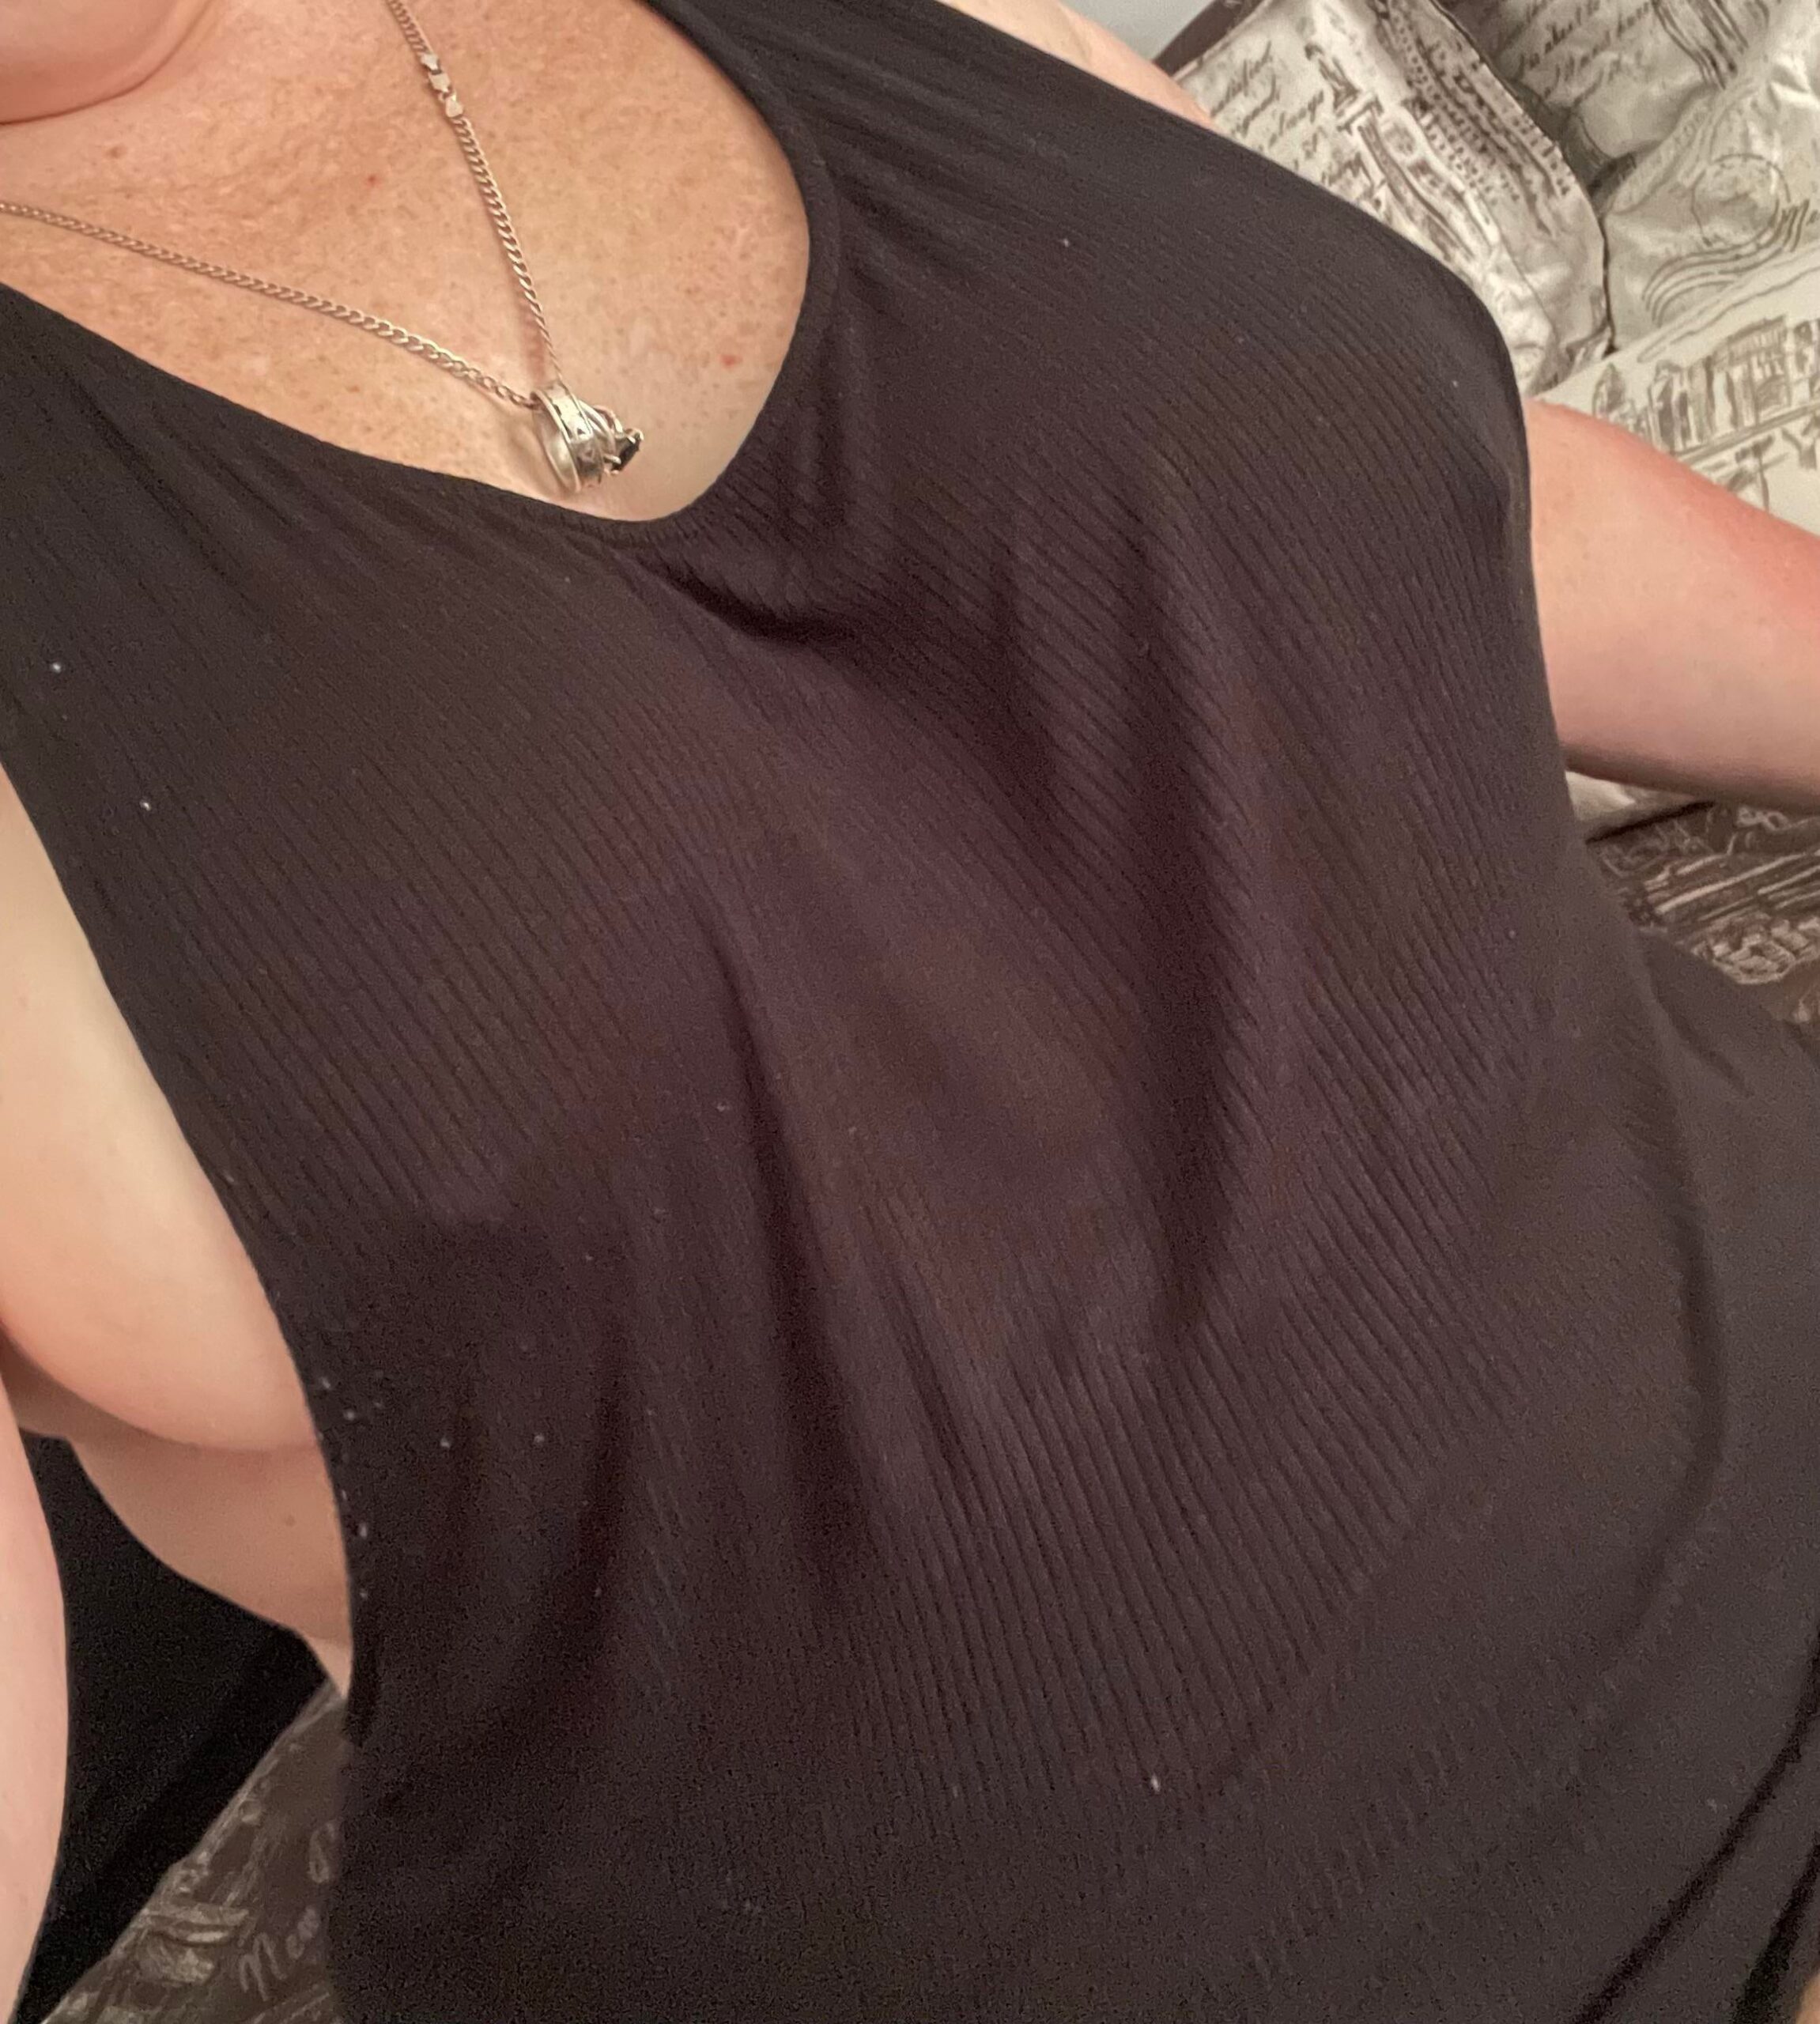 Thick BBW -  Home after a lovely afternoon at the pool 😘